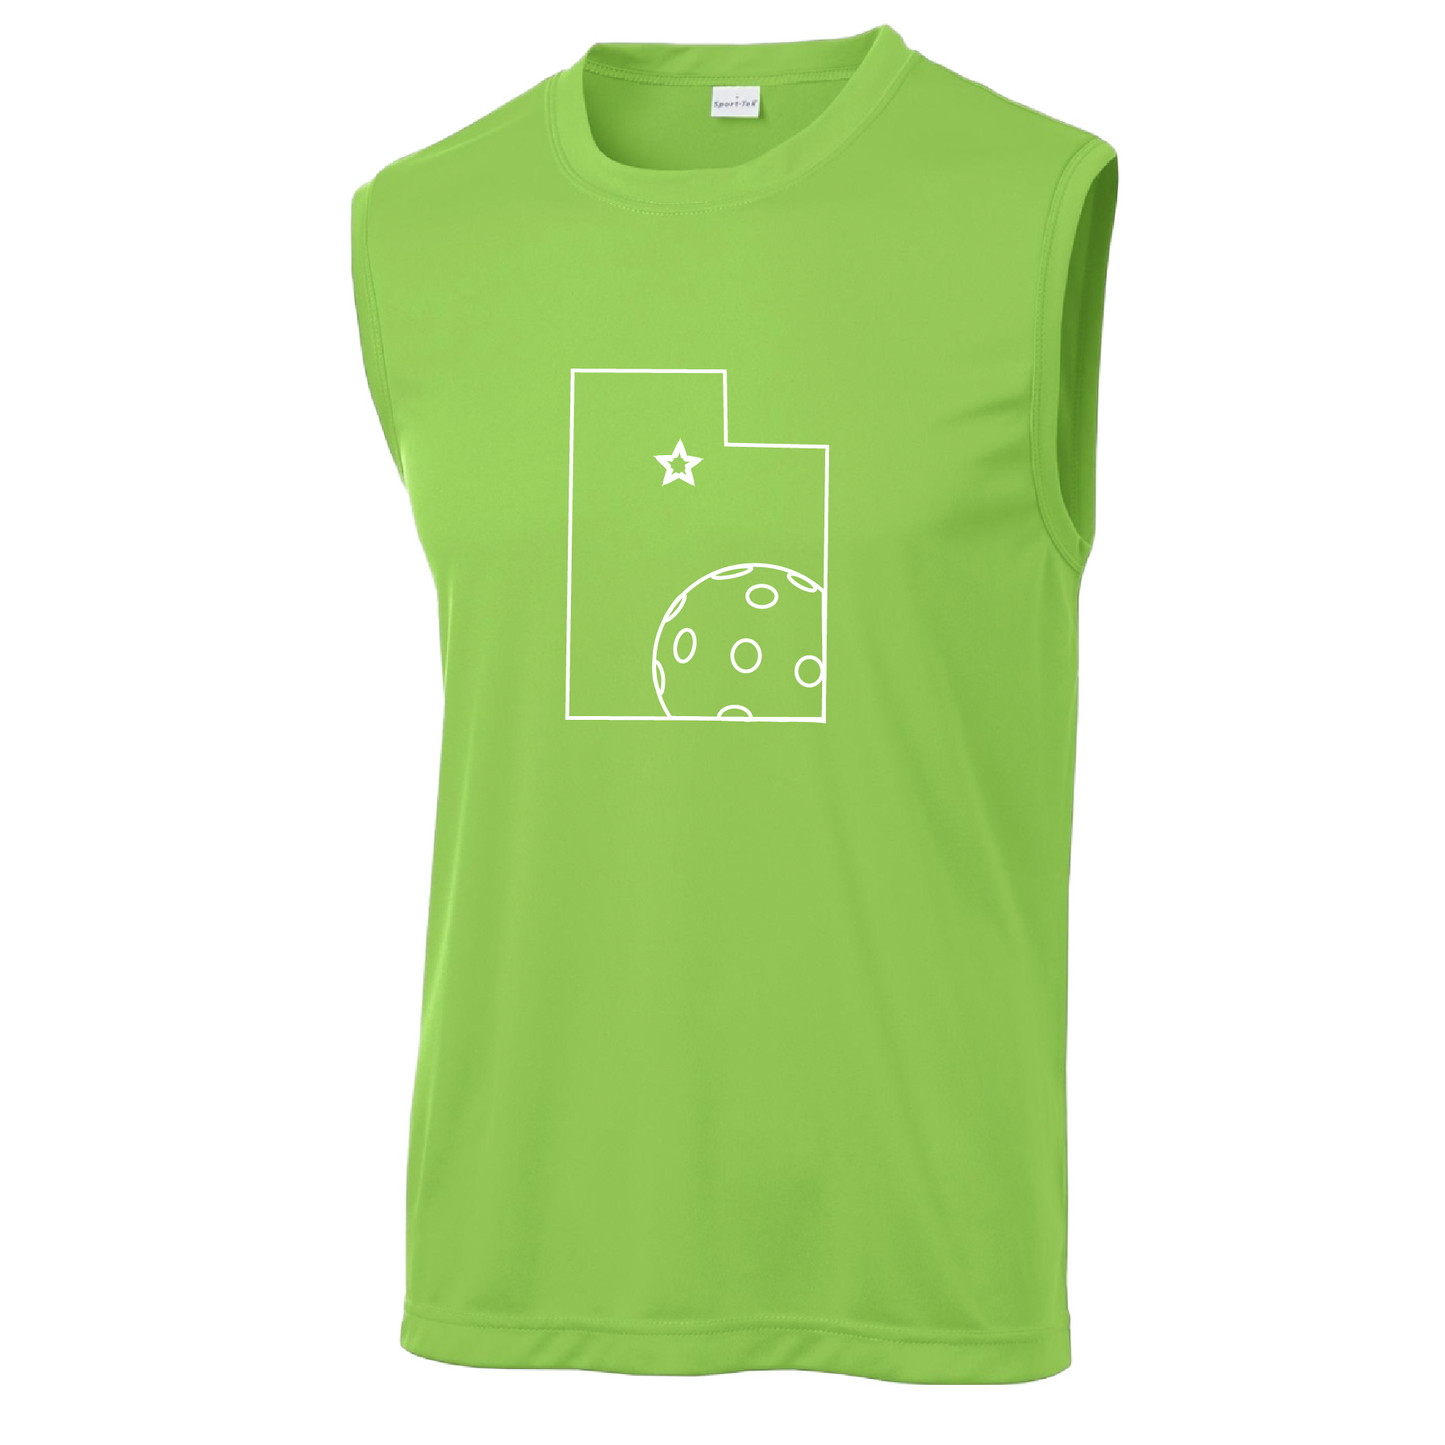 Pickleball Design: Utah Pickleball.   Men's Styles: Sleeveless  Shirts are lightweight, roomy and highly breathable. These moisture-wicking shirts are designed for athletic performance. They feature PosiCharge technology to lock in color and prevent logos from fading. Removable tag and set-in sleeves for comfort.